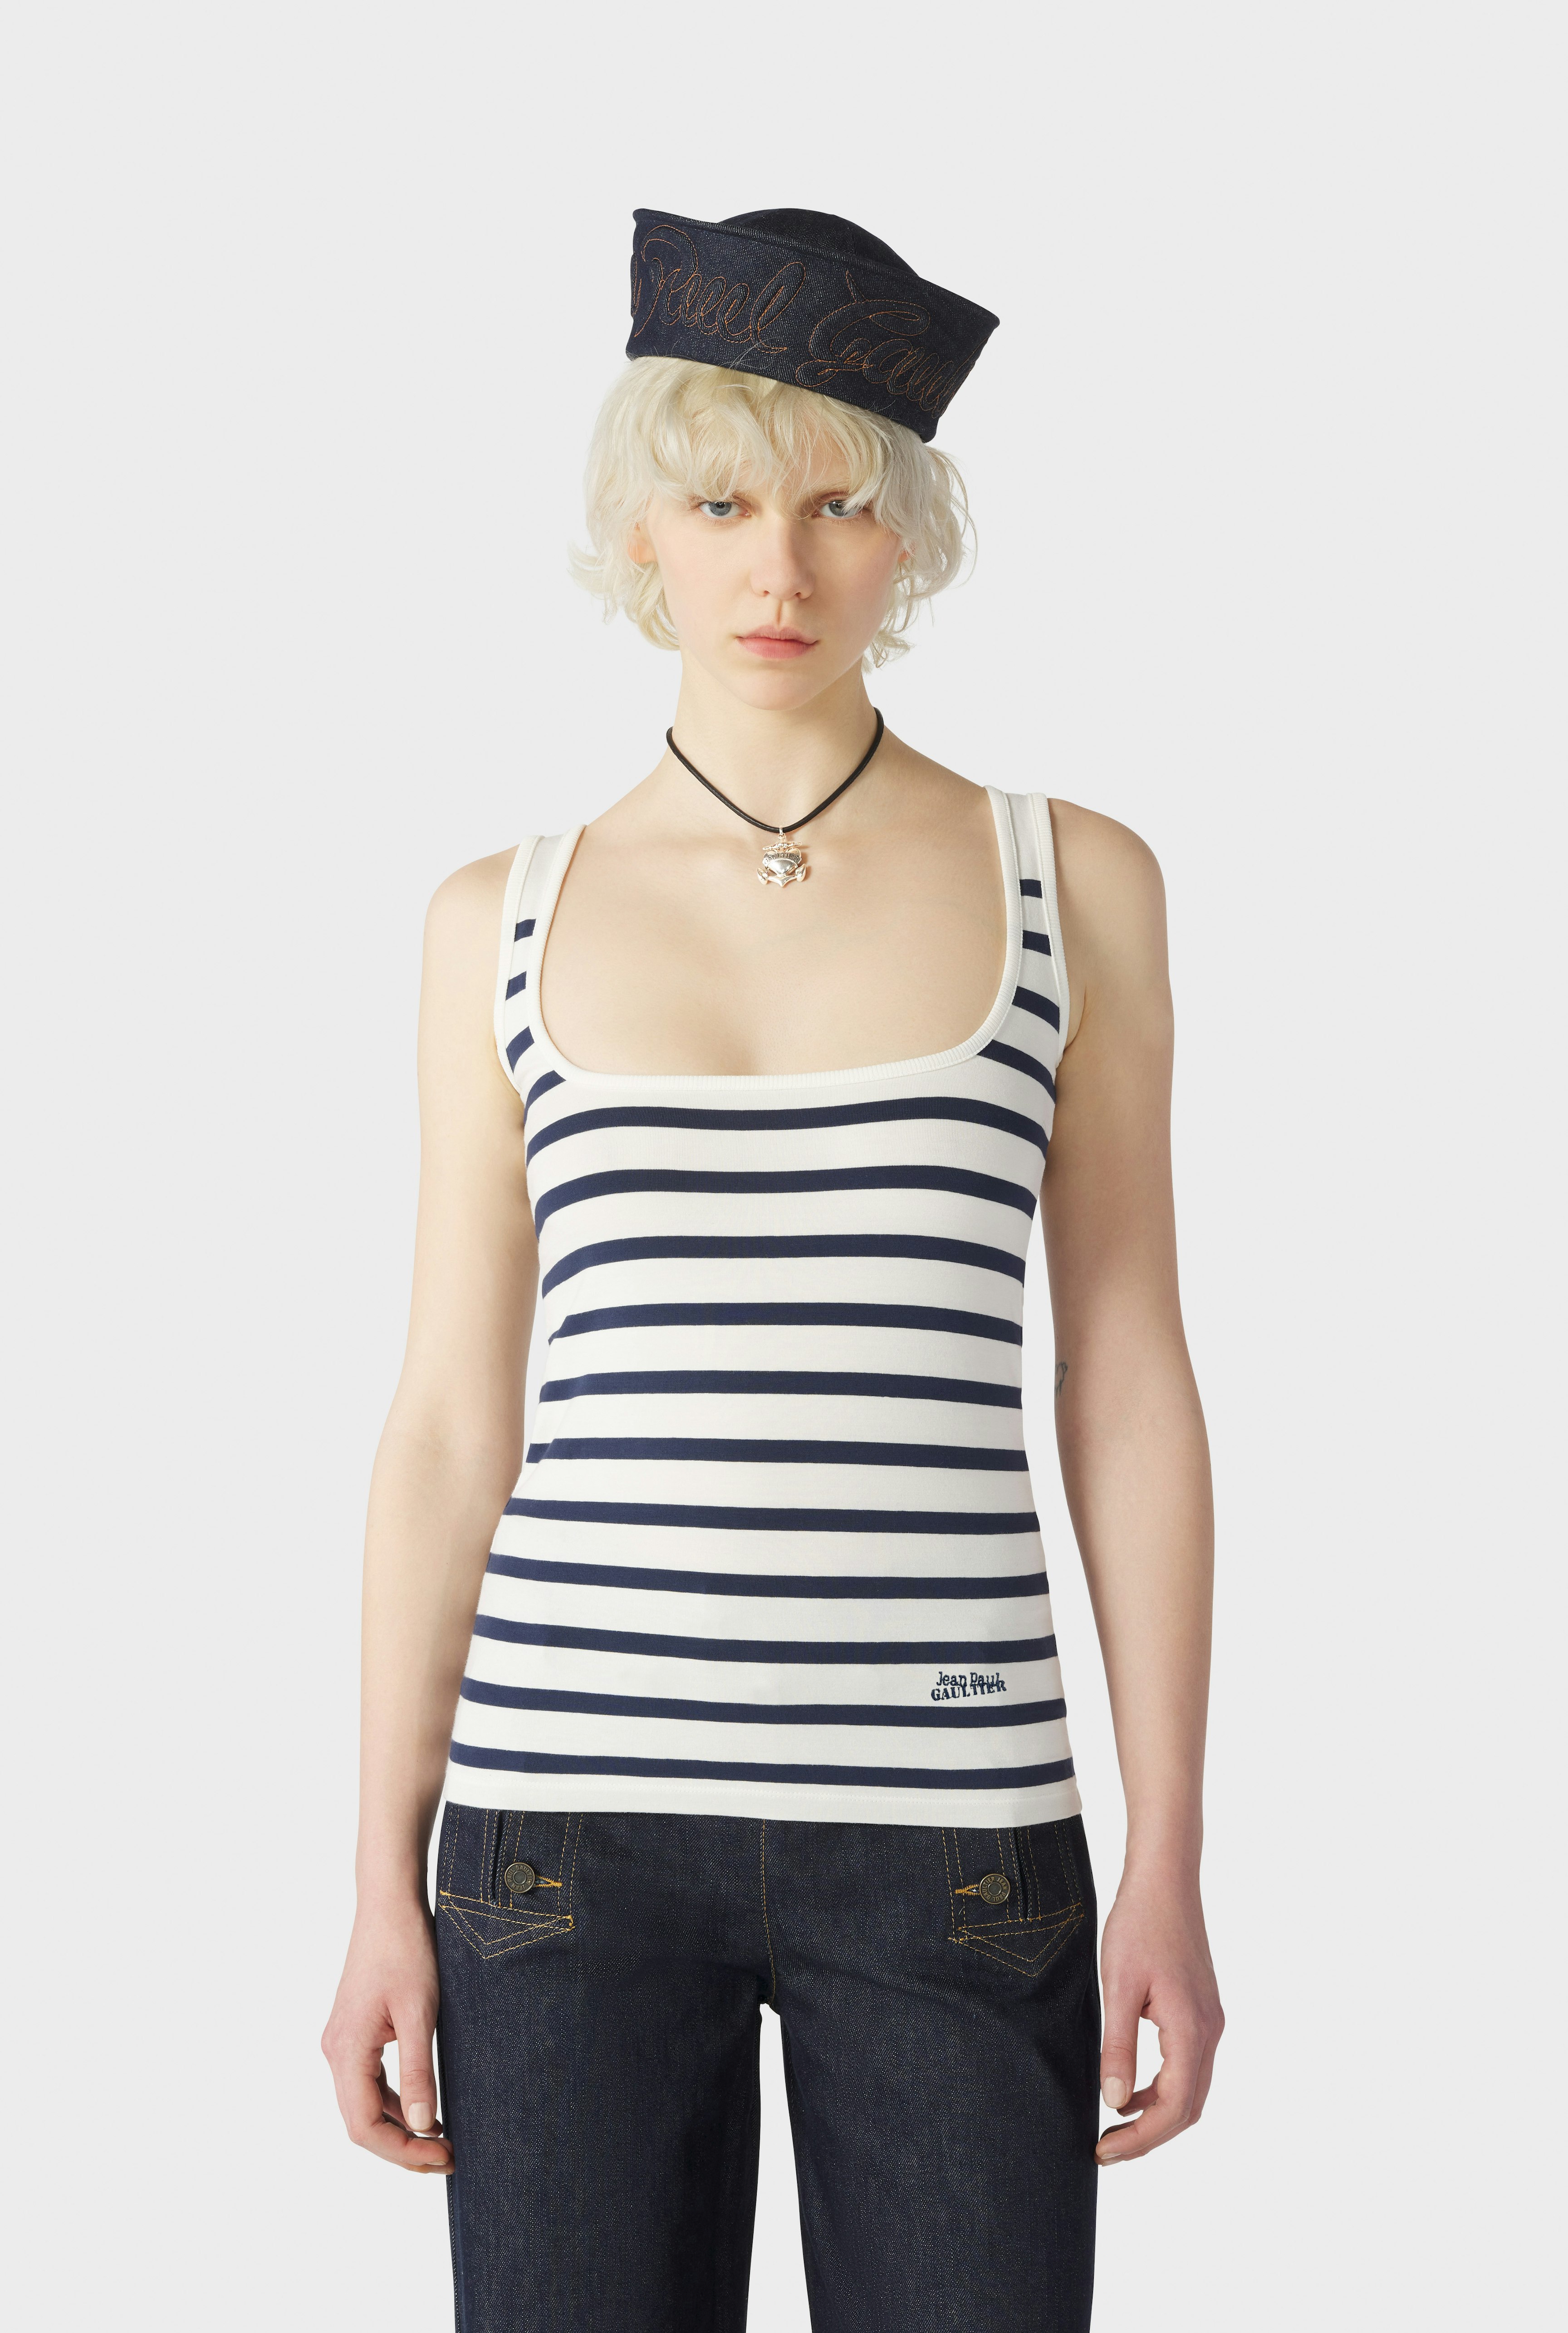 The Sailor Tank Top for Her